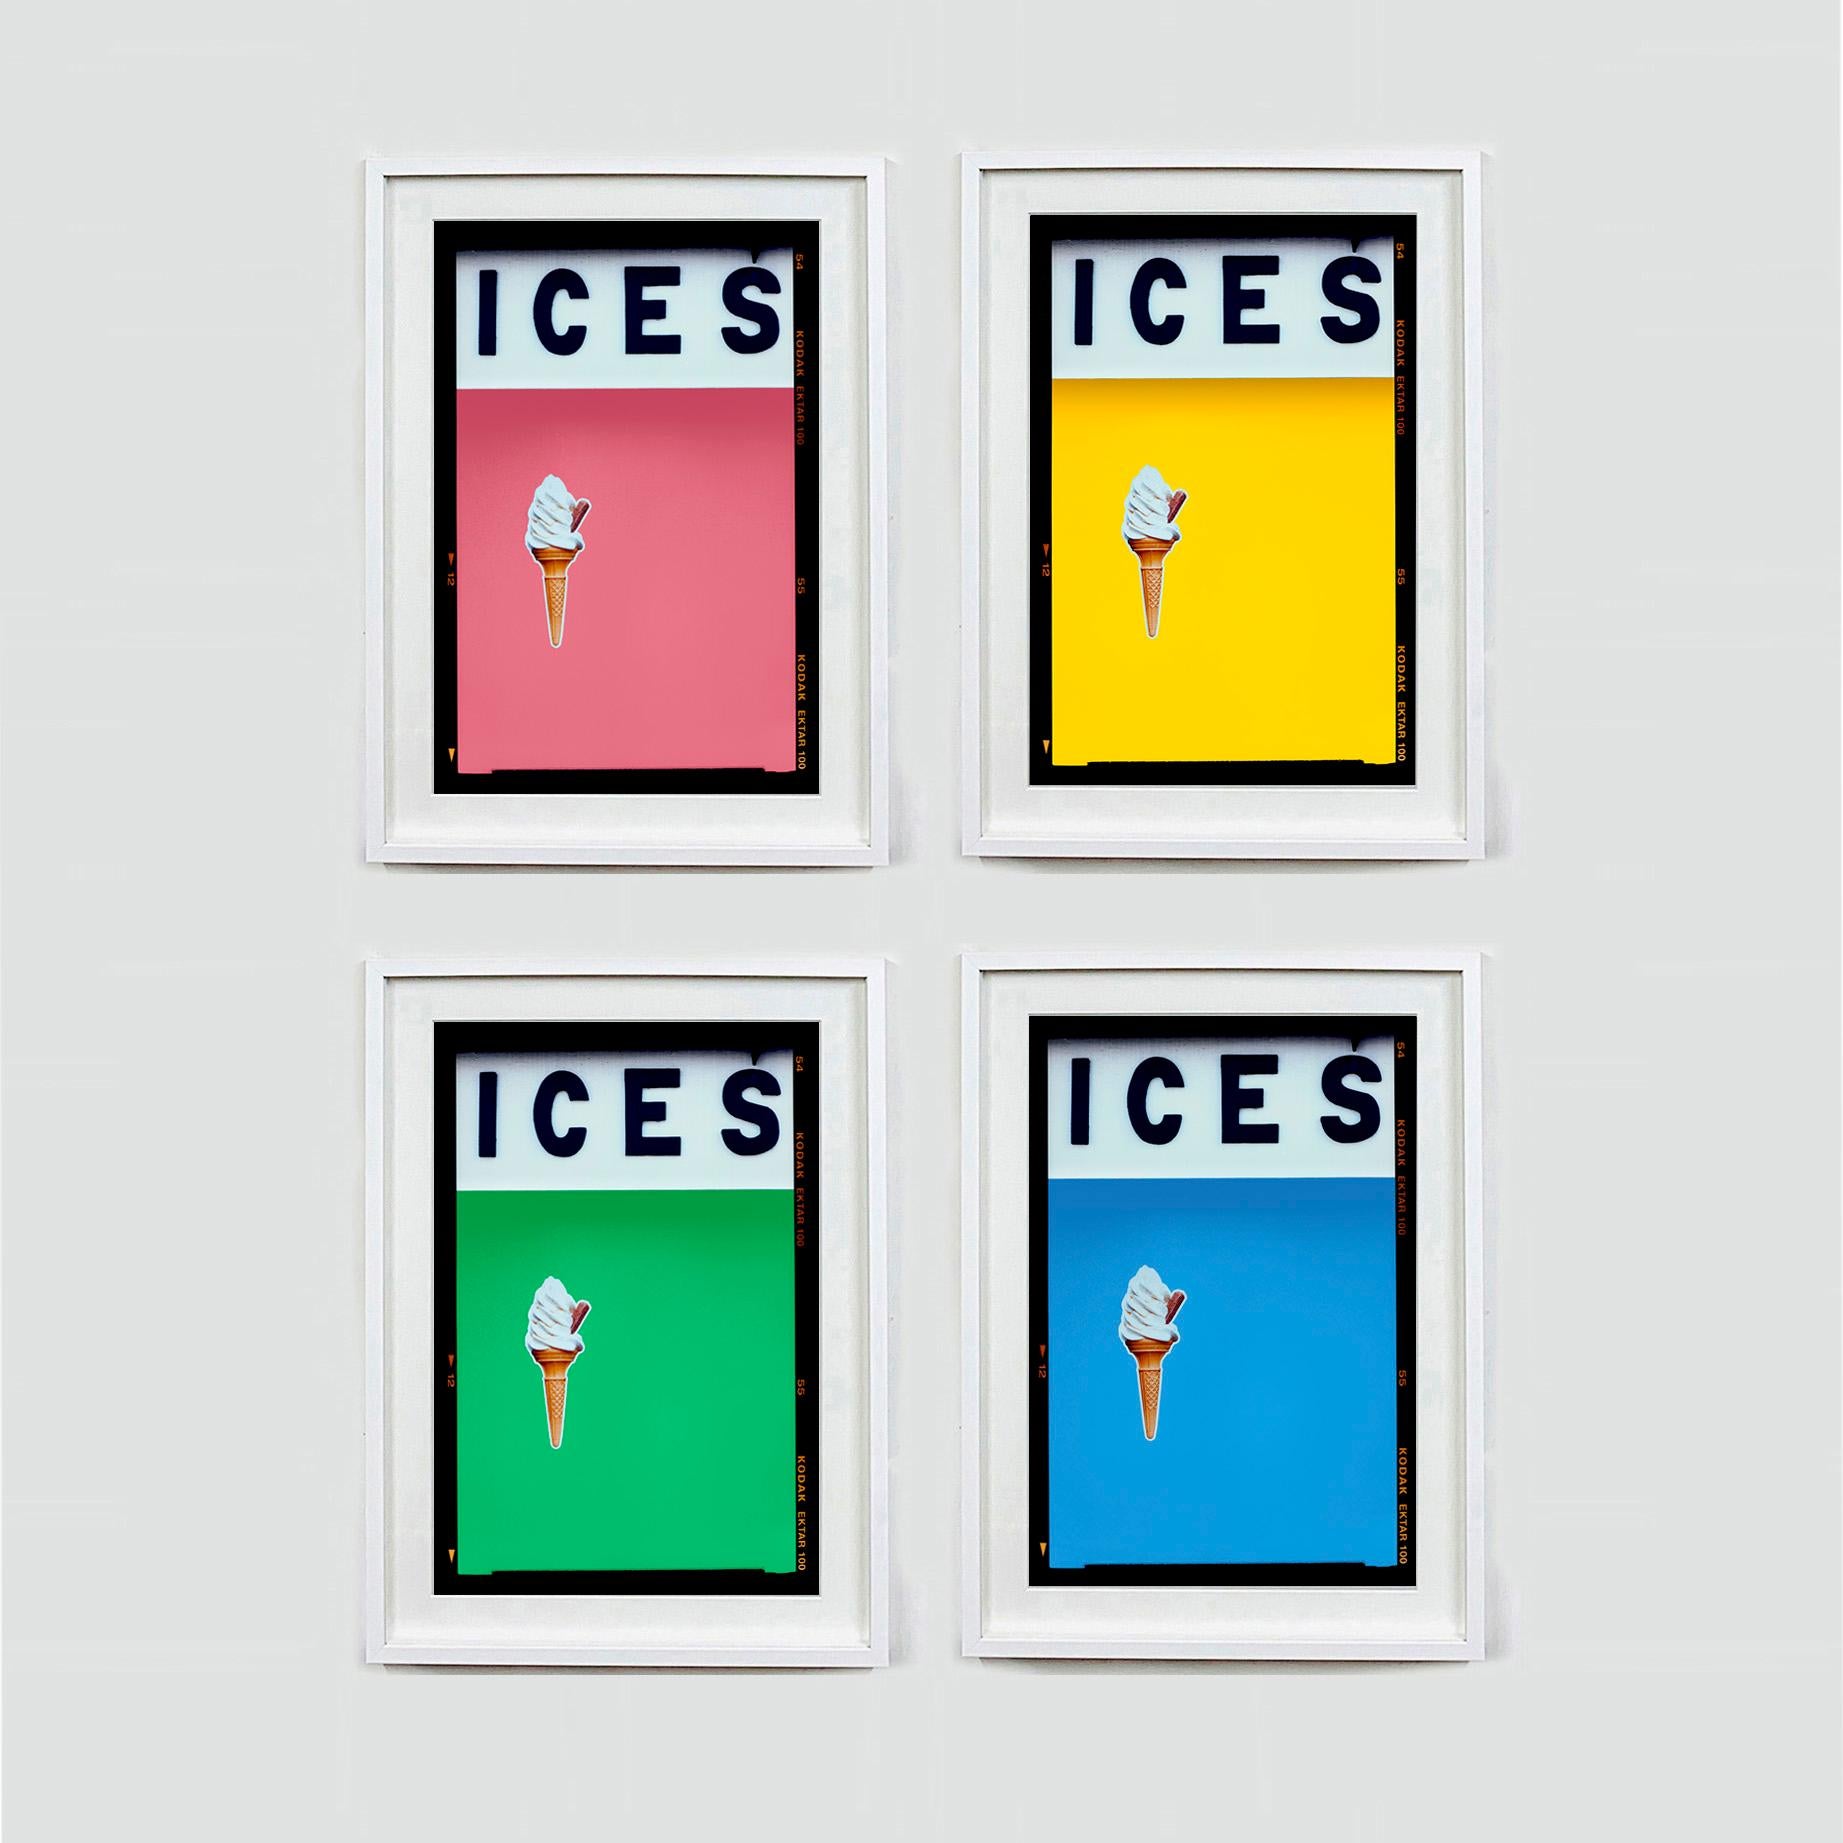 ICES, by Richard Heeps, photographed at the British Seaside at the end of summer 2020. This artwork is about evoking memories of the simple joy of days by the beach. The sky blue color blocking, typography and the surreal twist of the suspended ice